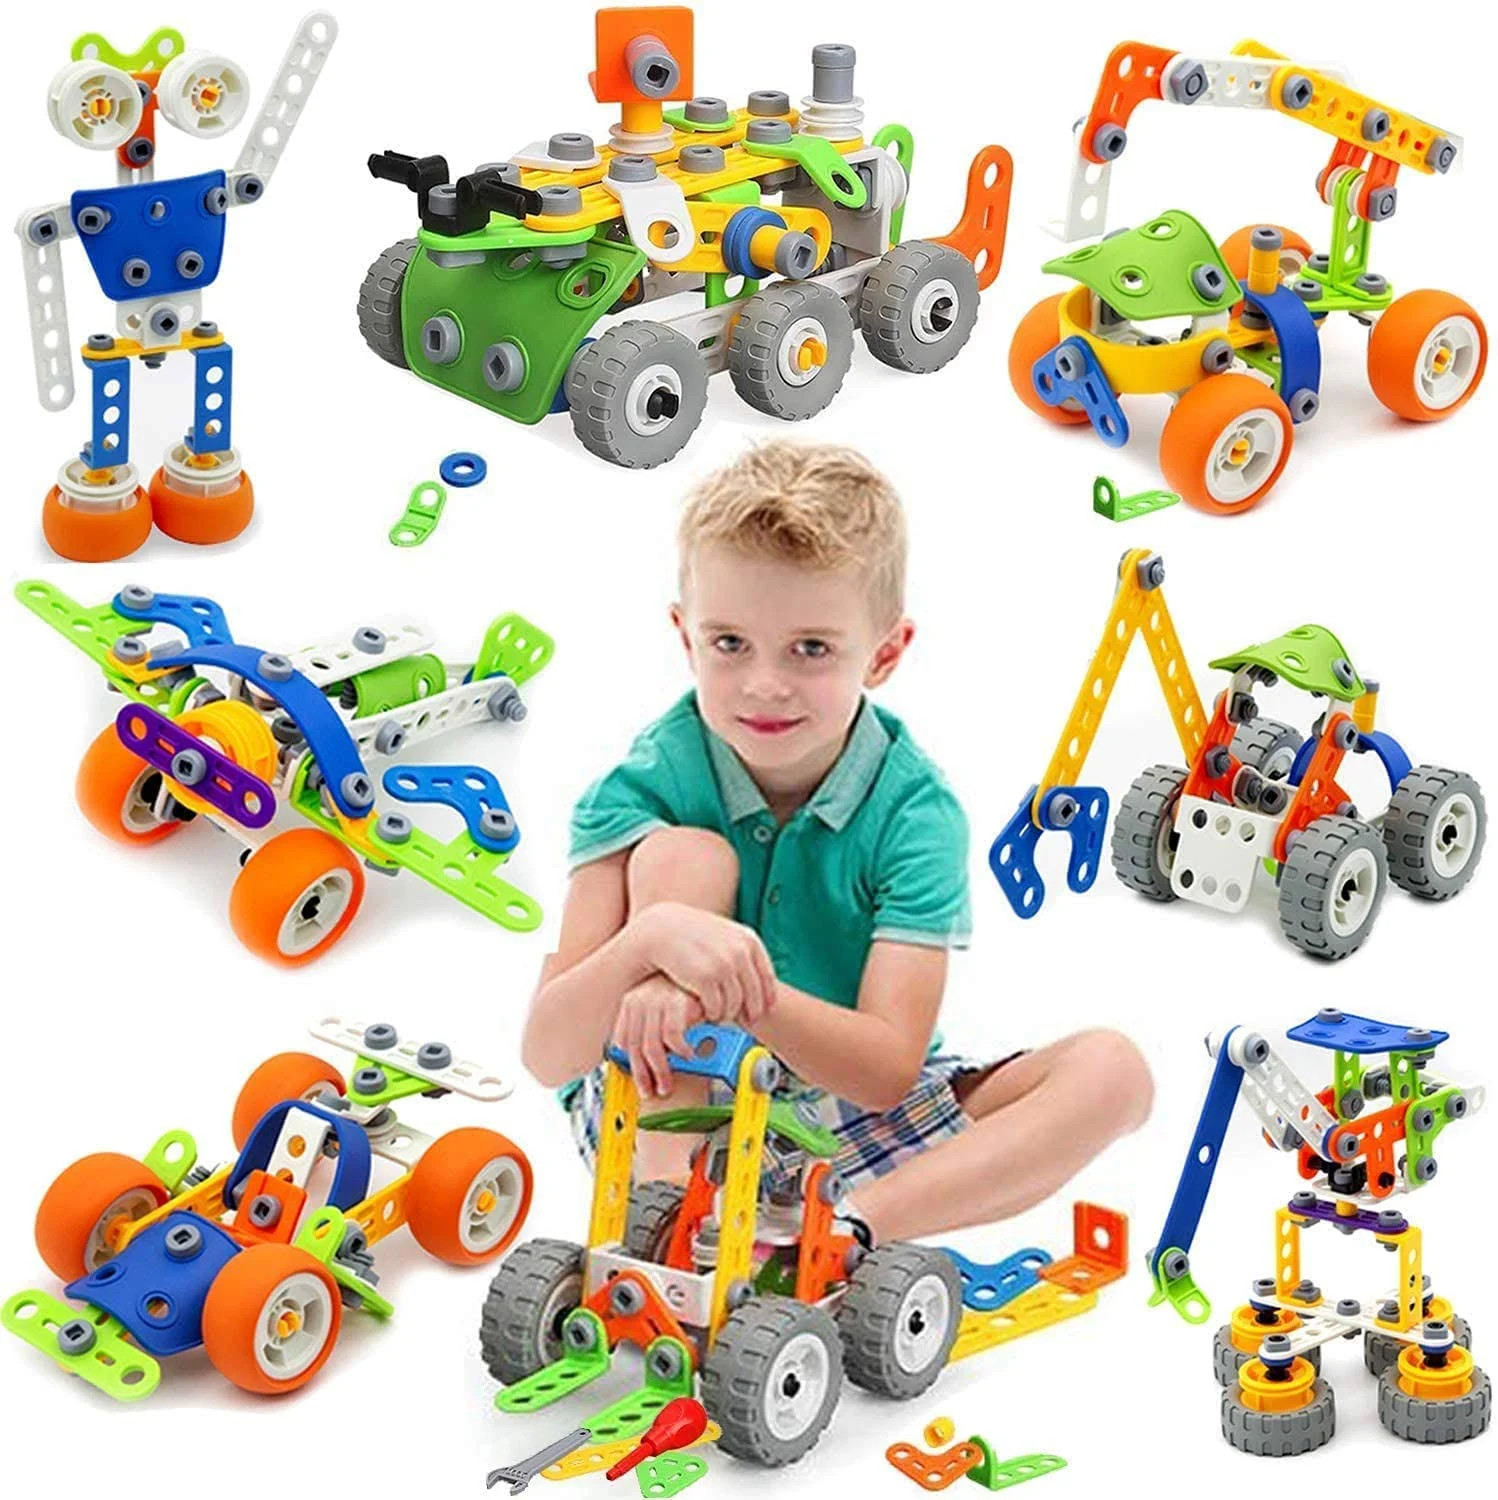 Building Toys Model Airplane Set -258 Pieces DIY Building Stem Projects Toys for Kids Boys Ages 8-12 and Older,Building Assembly Science Educational